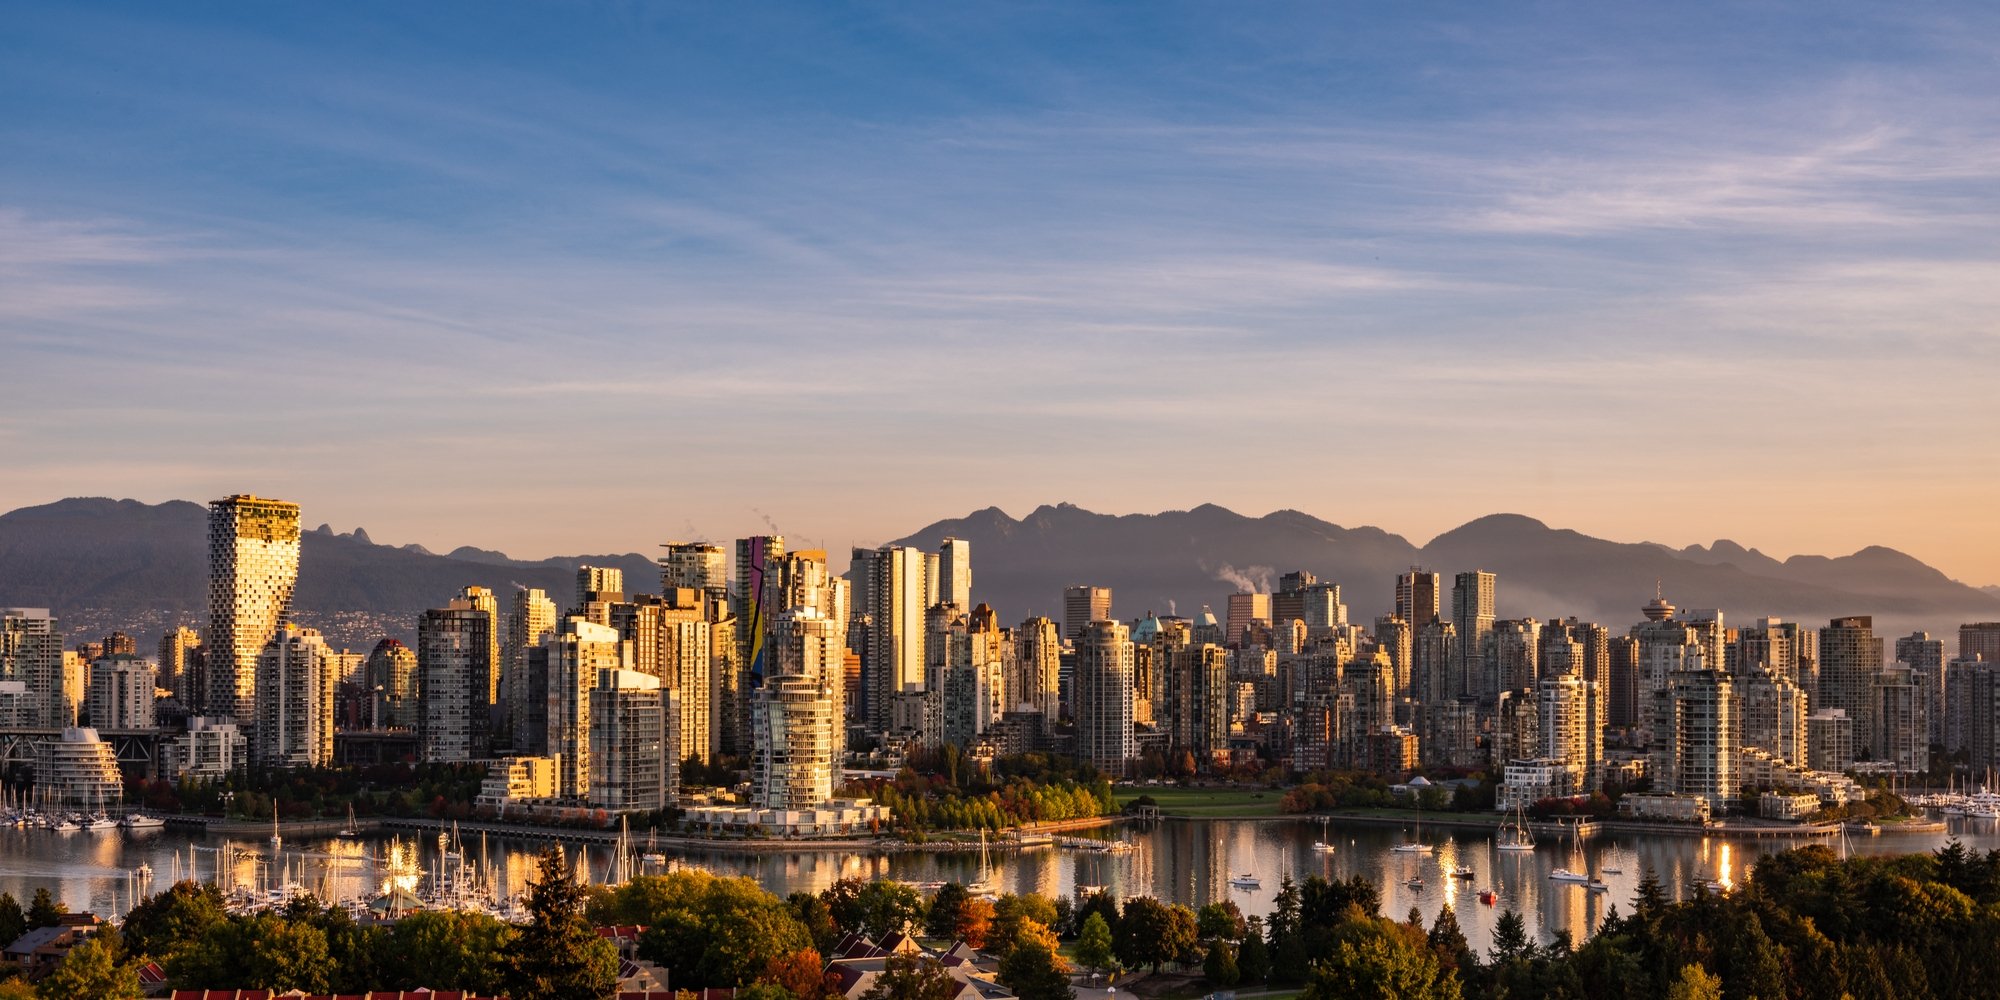 Aerial photo of Vancouver's skyline at sunset. The light reflects off the buildings and the sky glows behind the mountains in the distance.